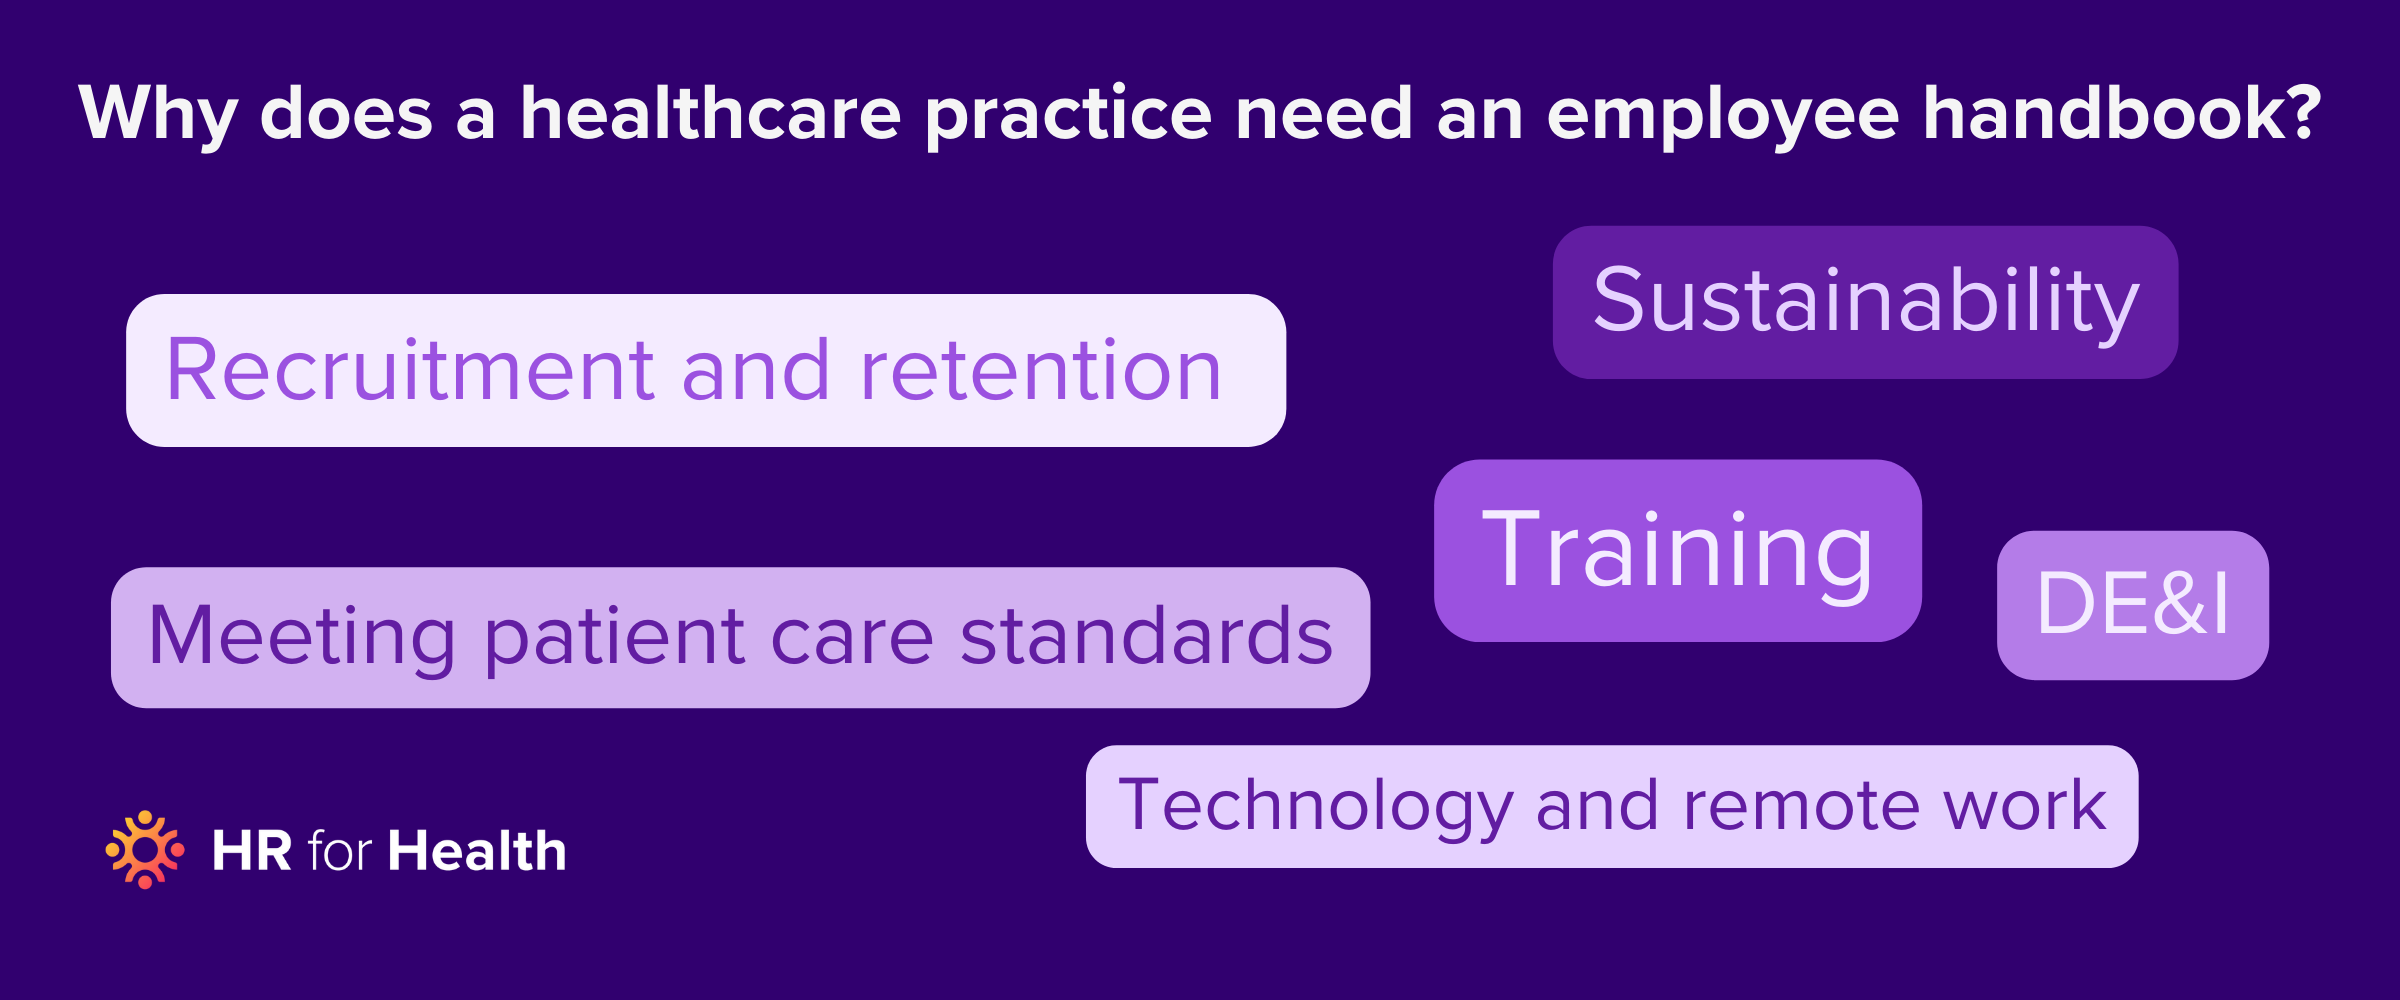 Why does a healthcare practice need an employee handbook